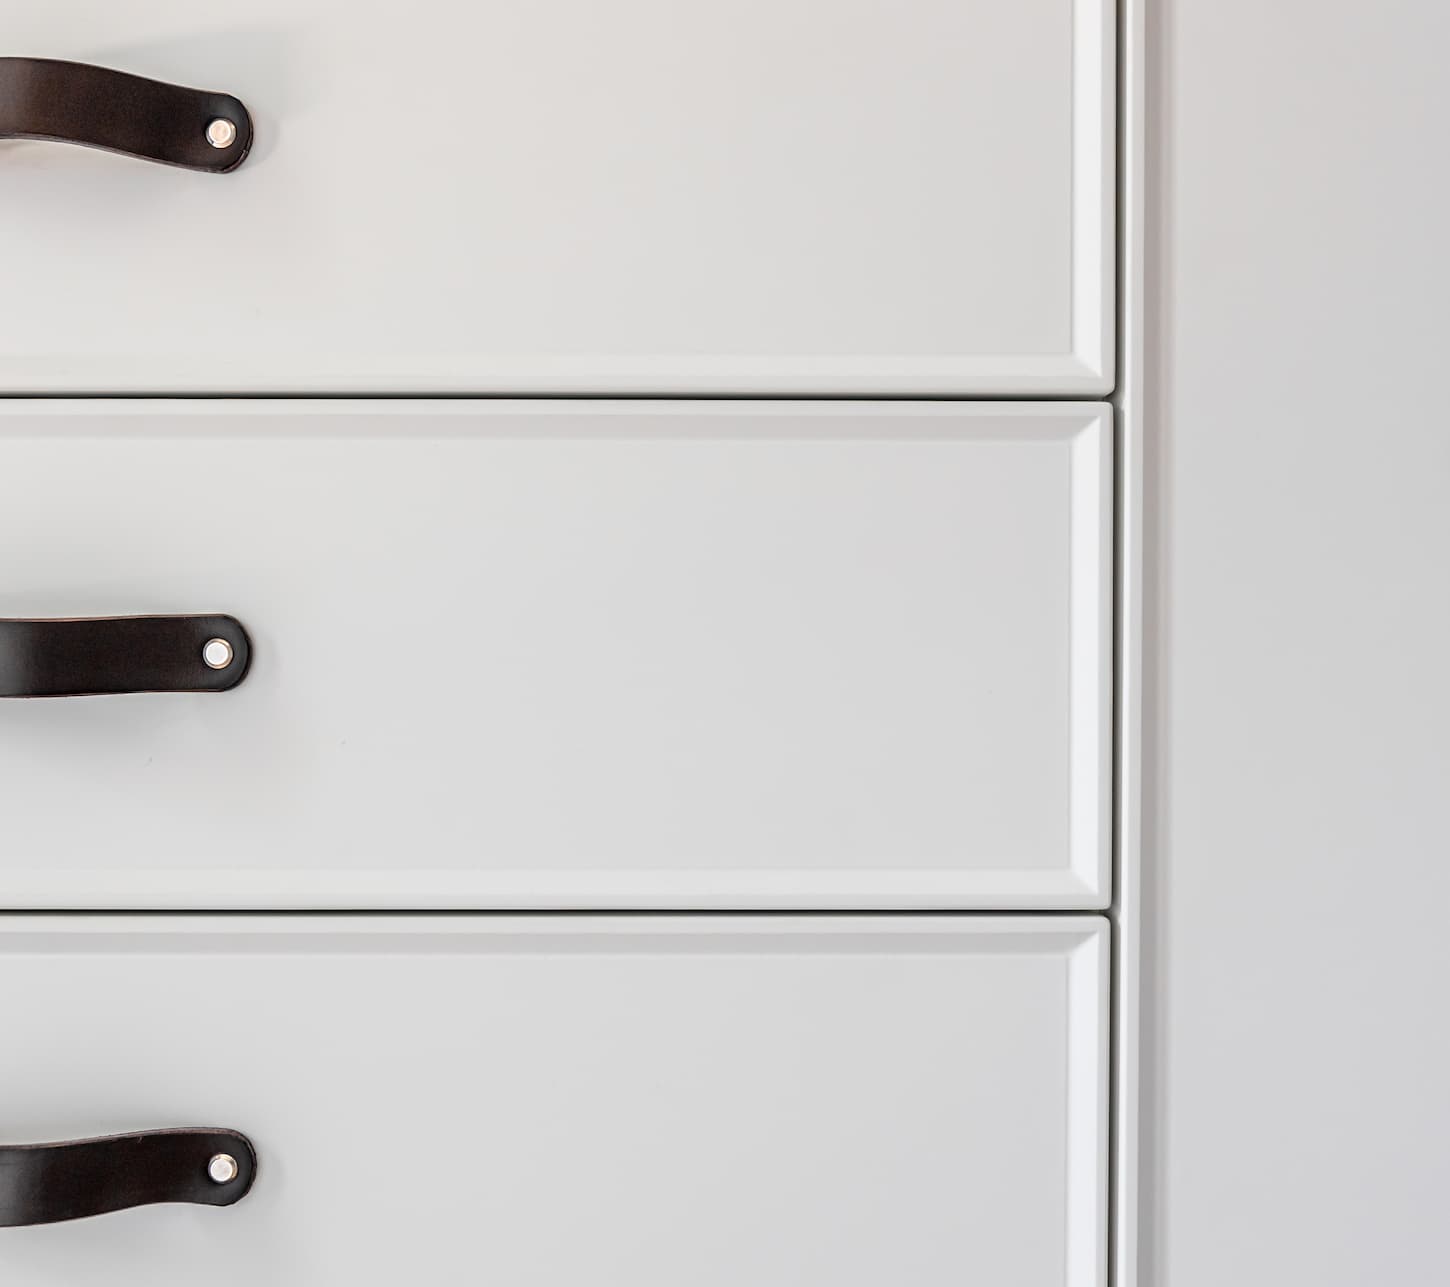 An image of Black handles of the kitchen drawer or cabinet.